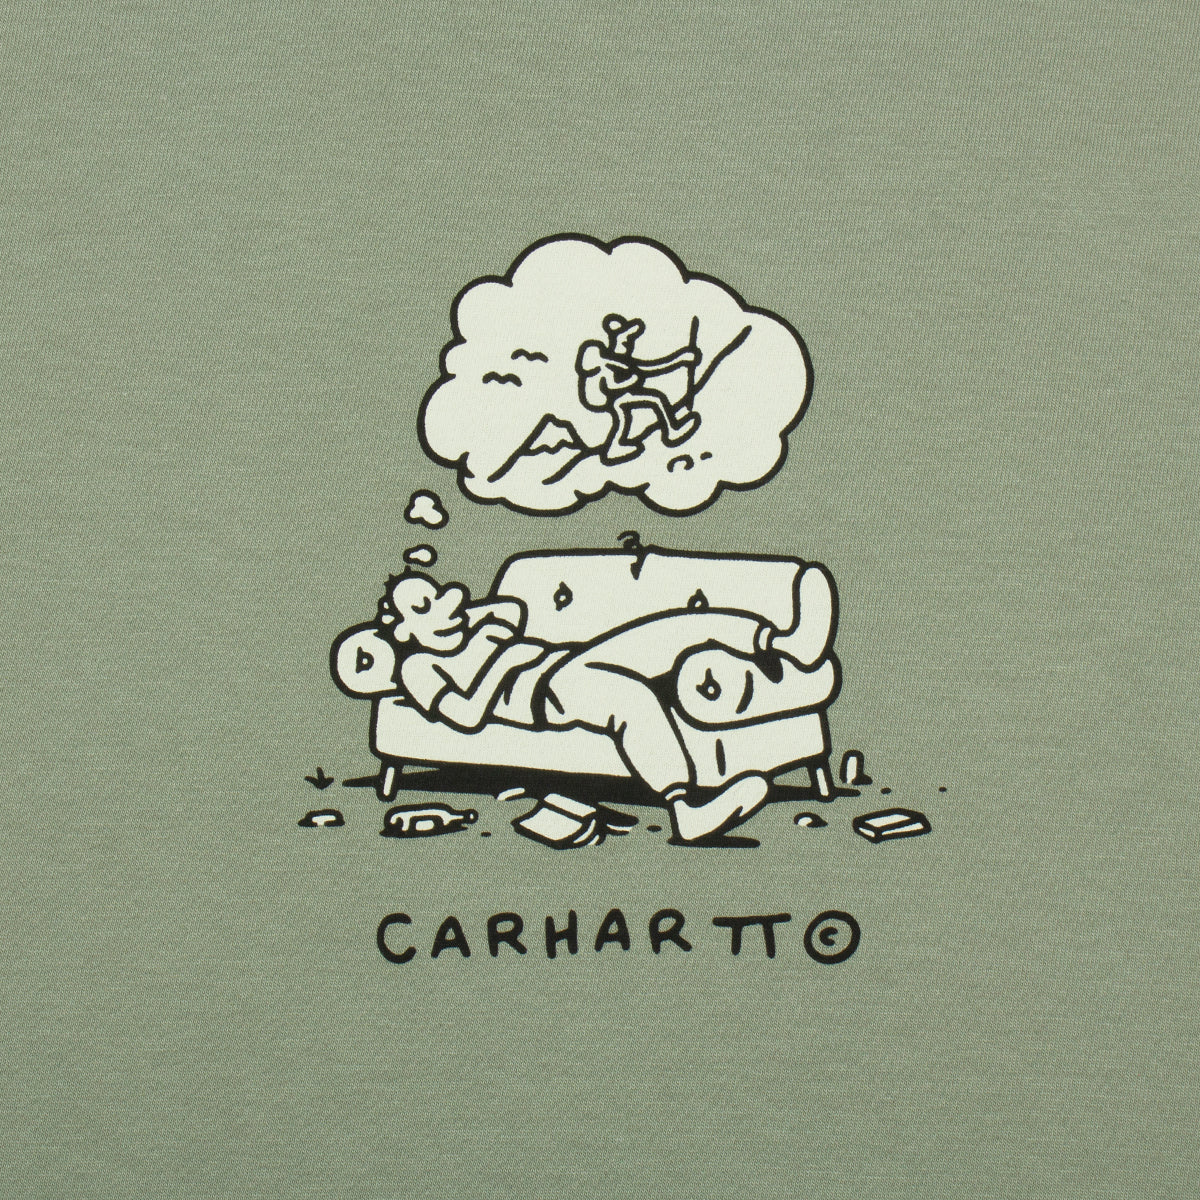 Carhartt WIP S/S Other Side T-Shirt Style # I031775-1CT Color : Yucca